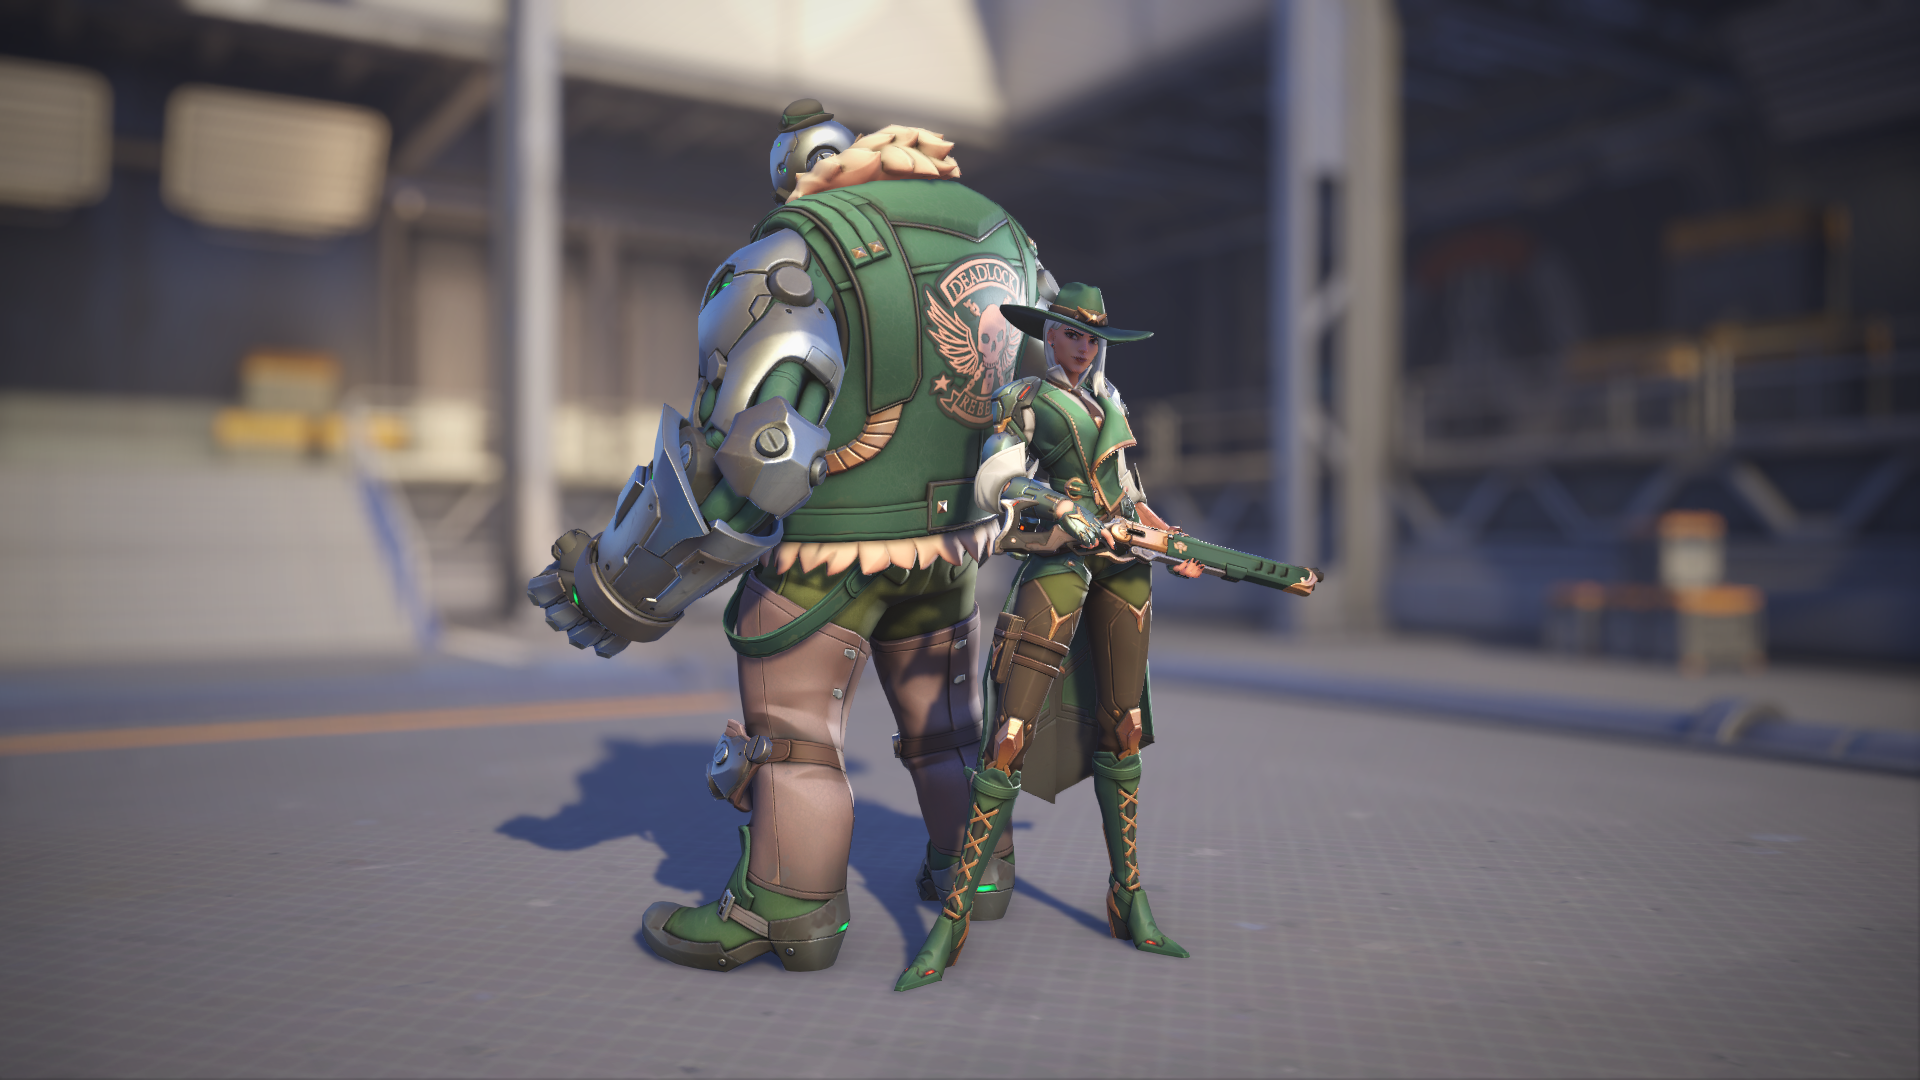 Ashe models her Yucca skin in Overwatch 2.